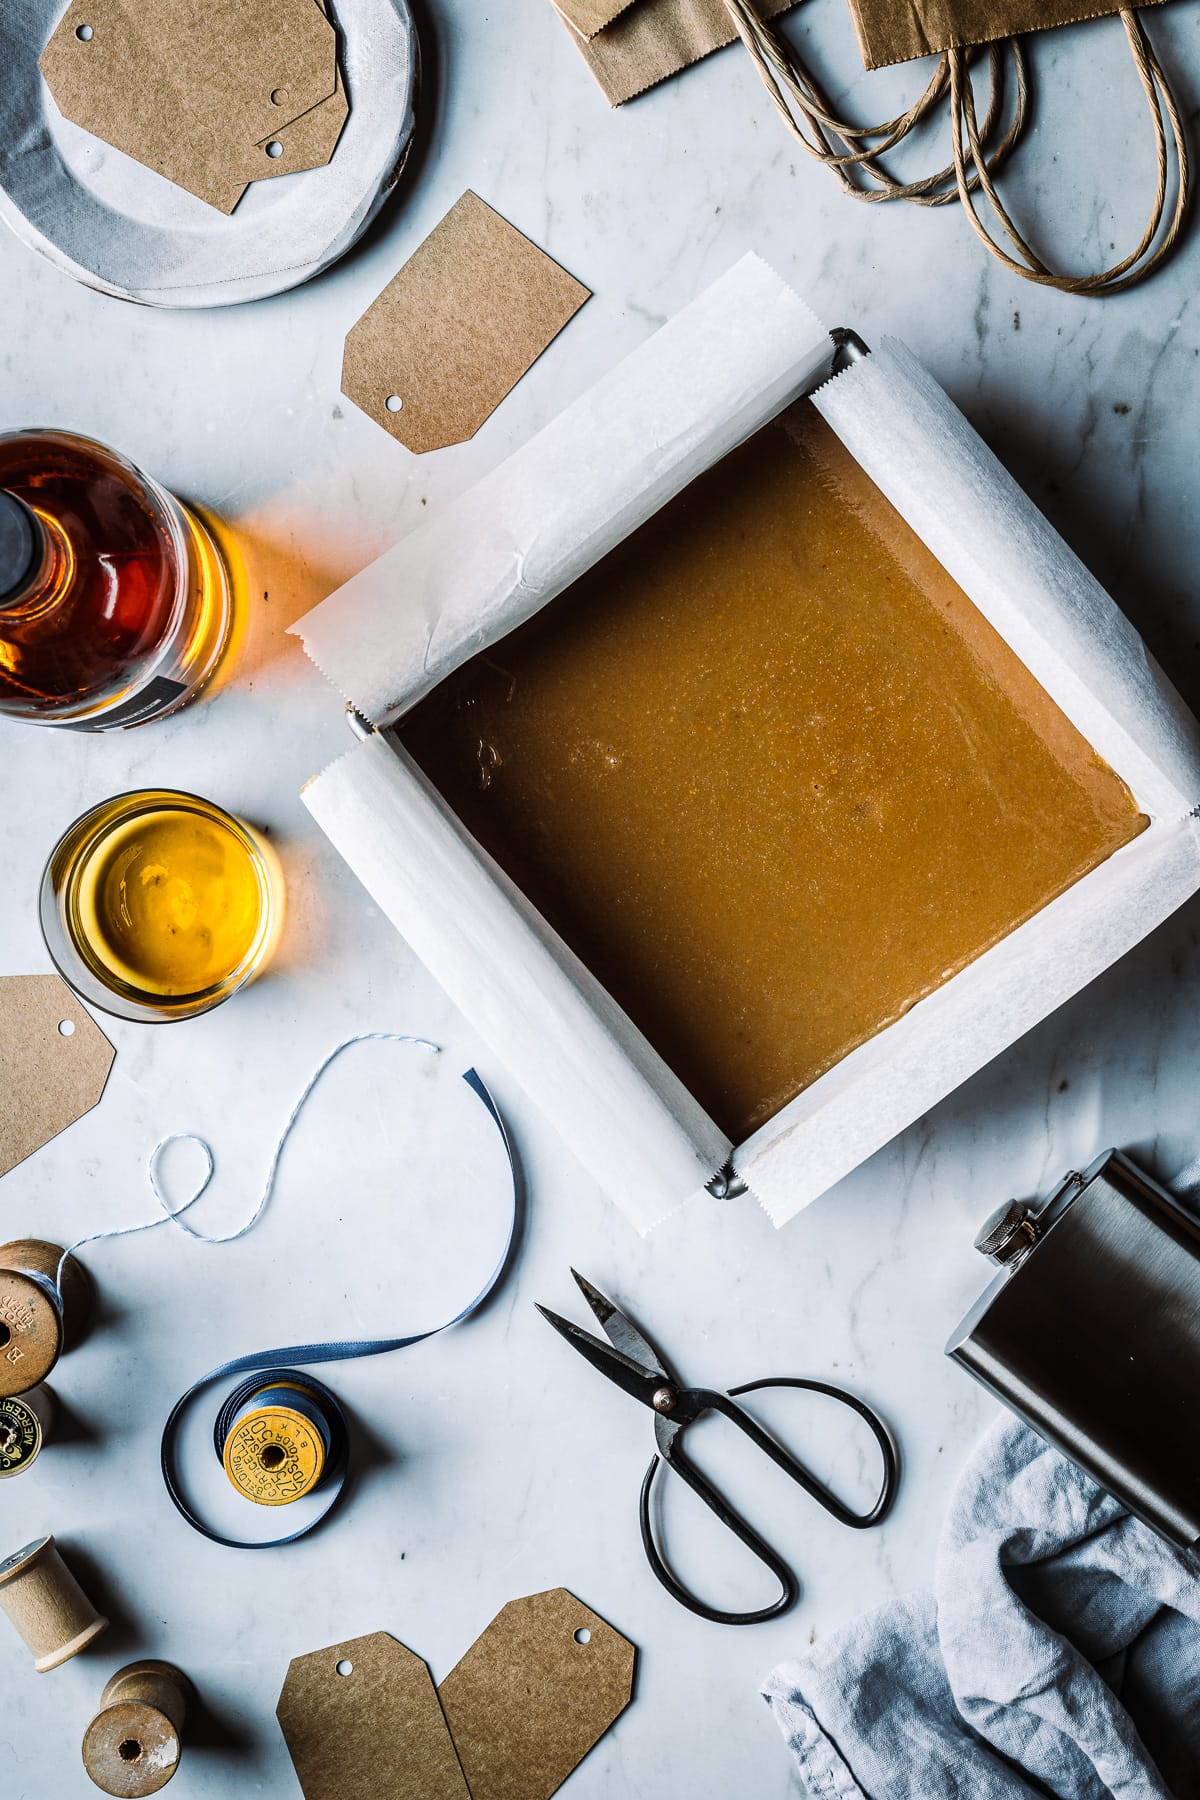 A pan of caramel on a cool marble surface with a bottle of whiskey and vintage wrapping supplies nearby